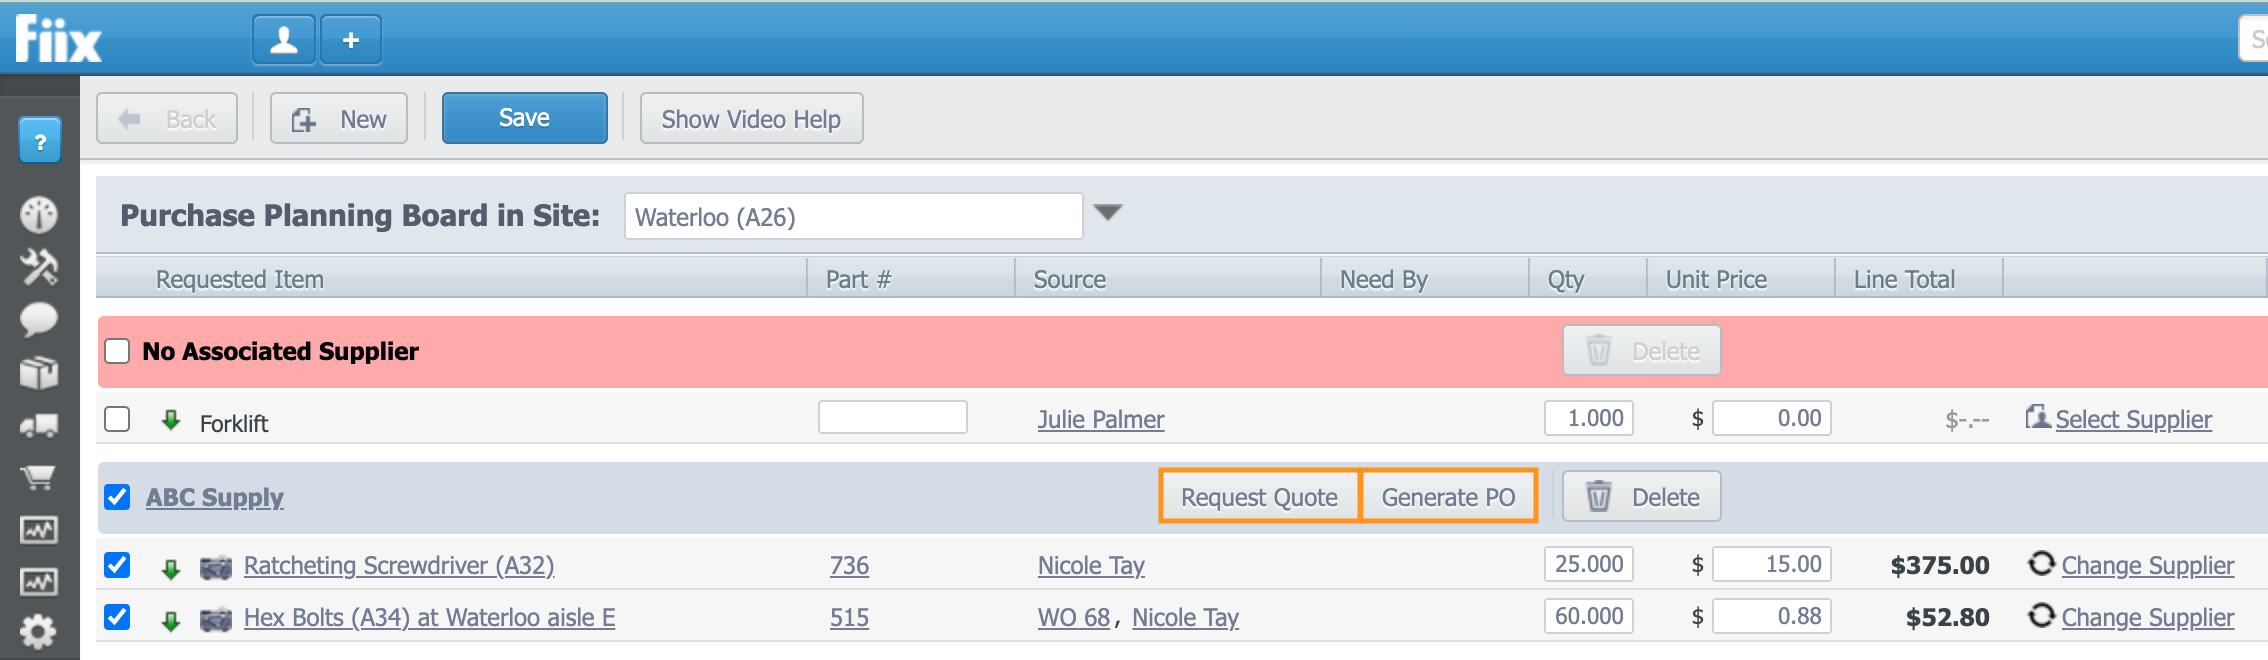 Purchase Planning Board with the Request Quote and Generate PO buttons highlighted.